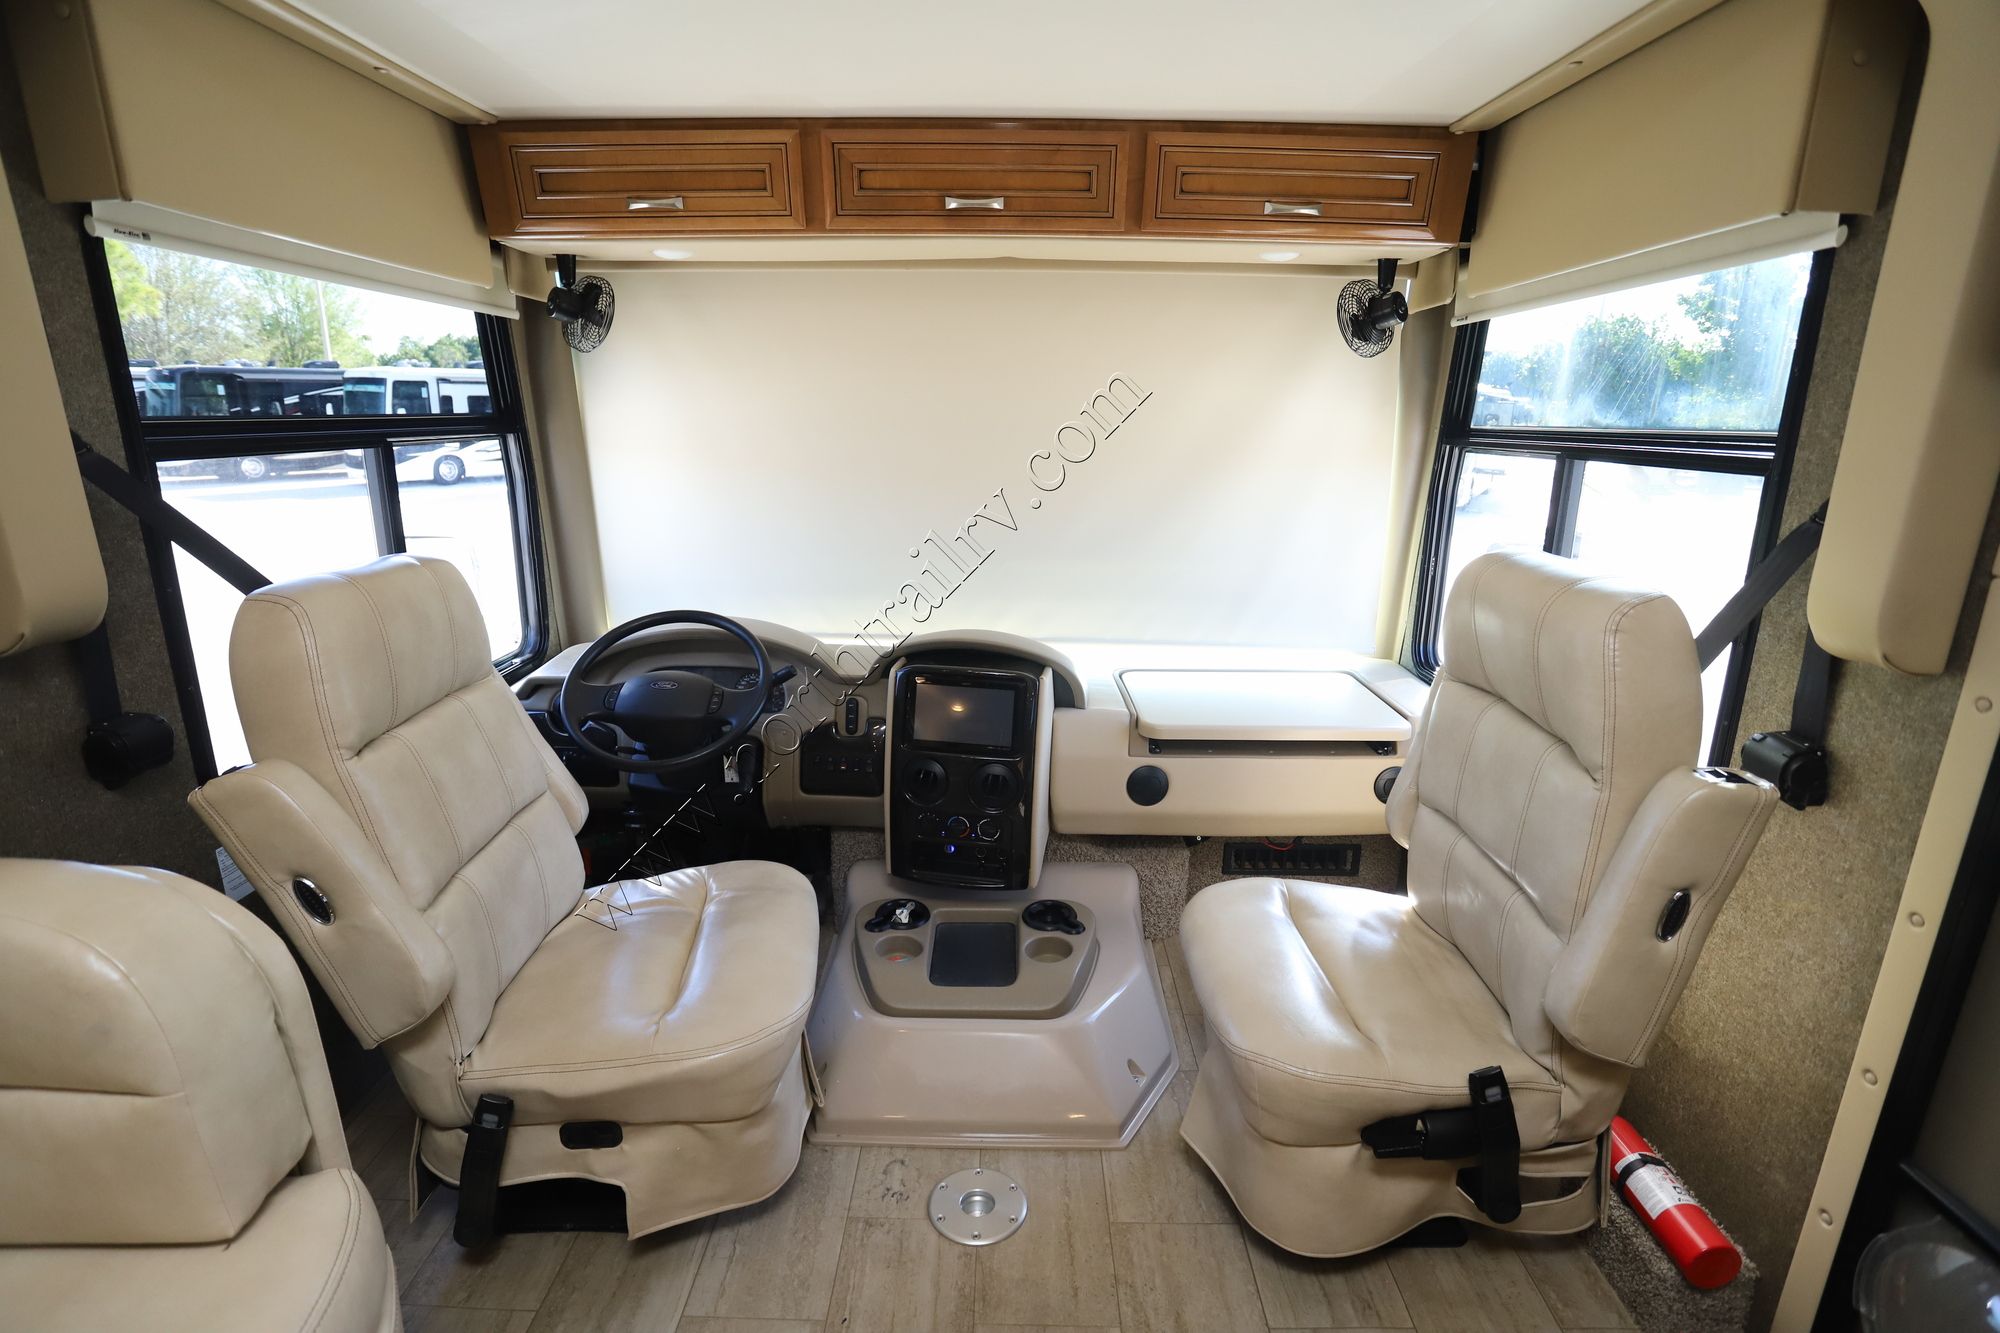 Used 2018 Thor Challenger 37TB Class A  For Sale